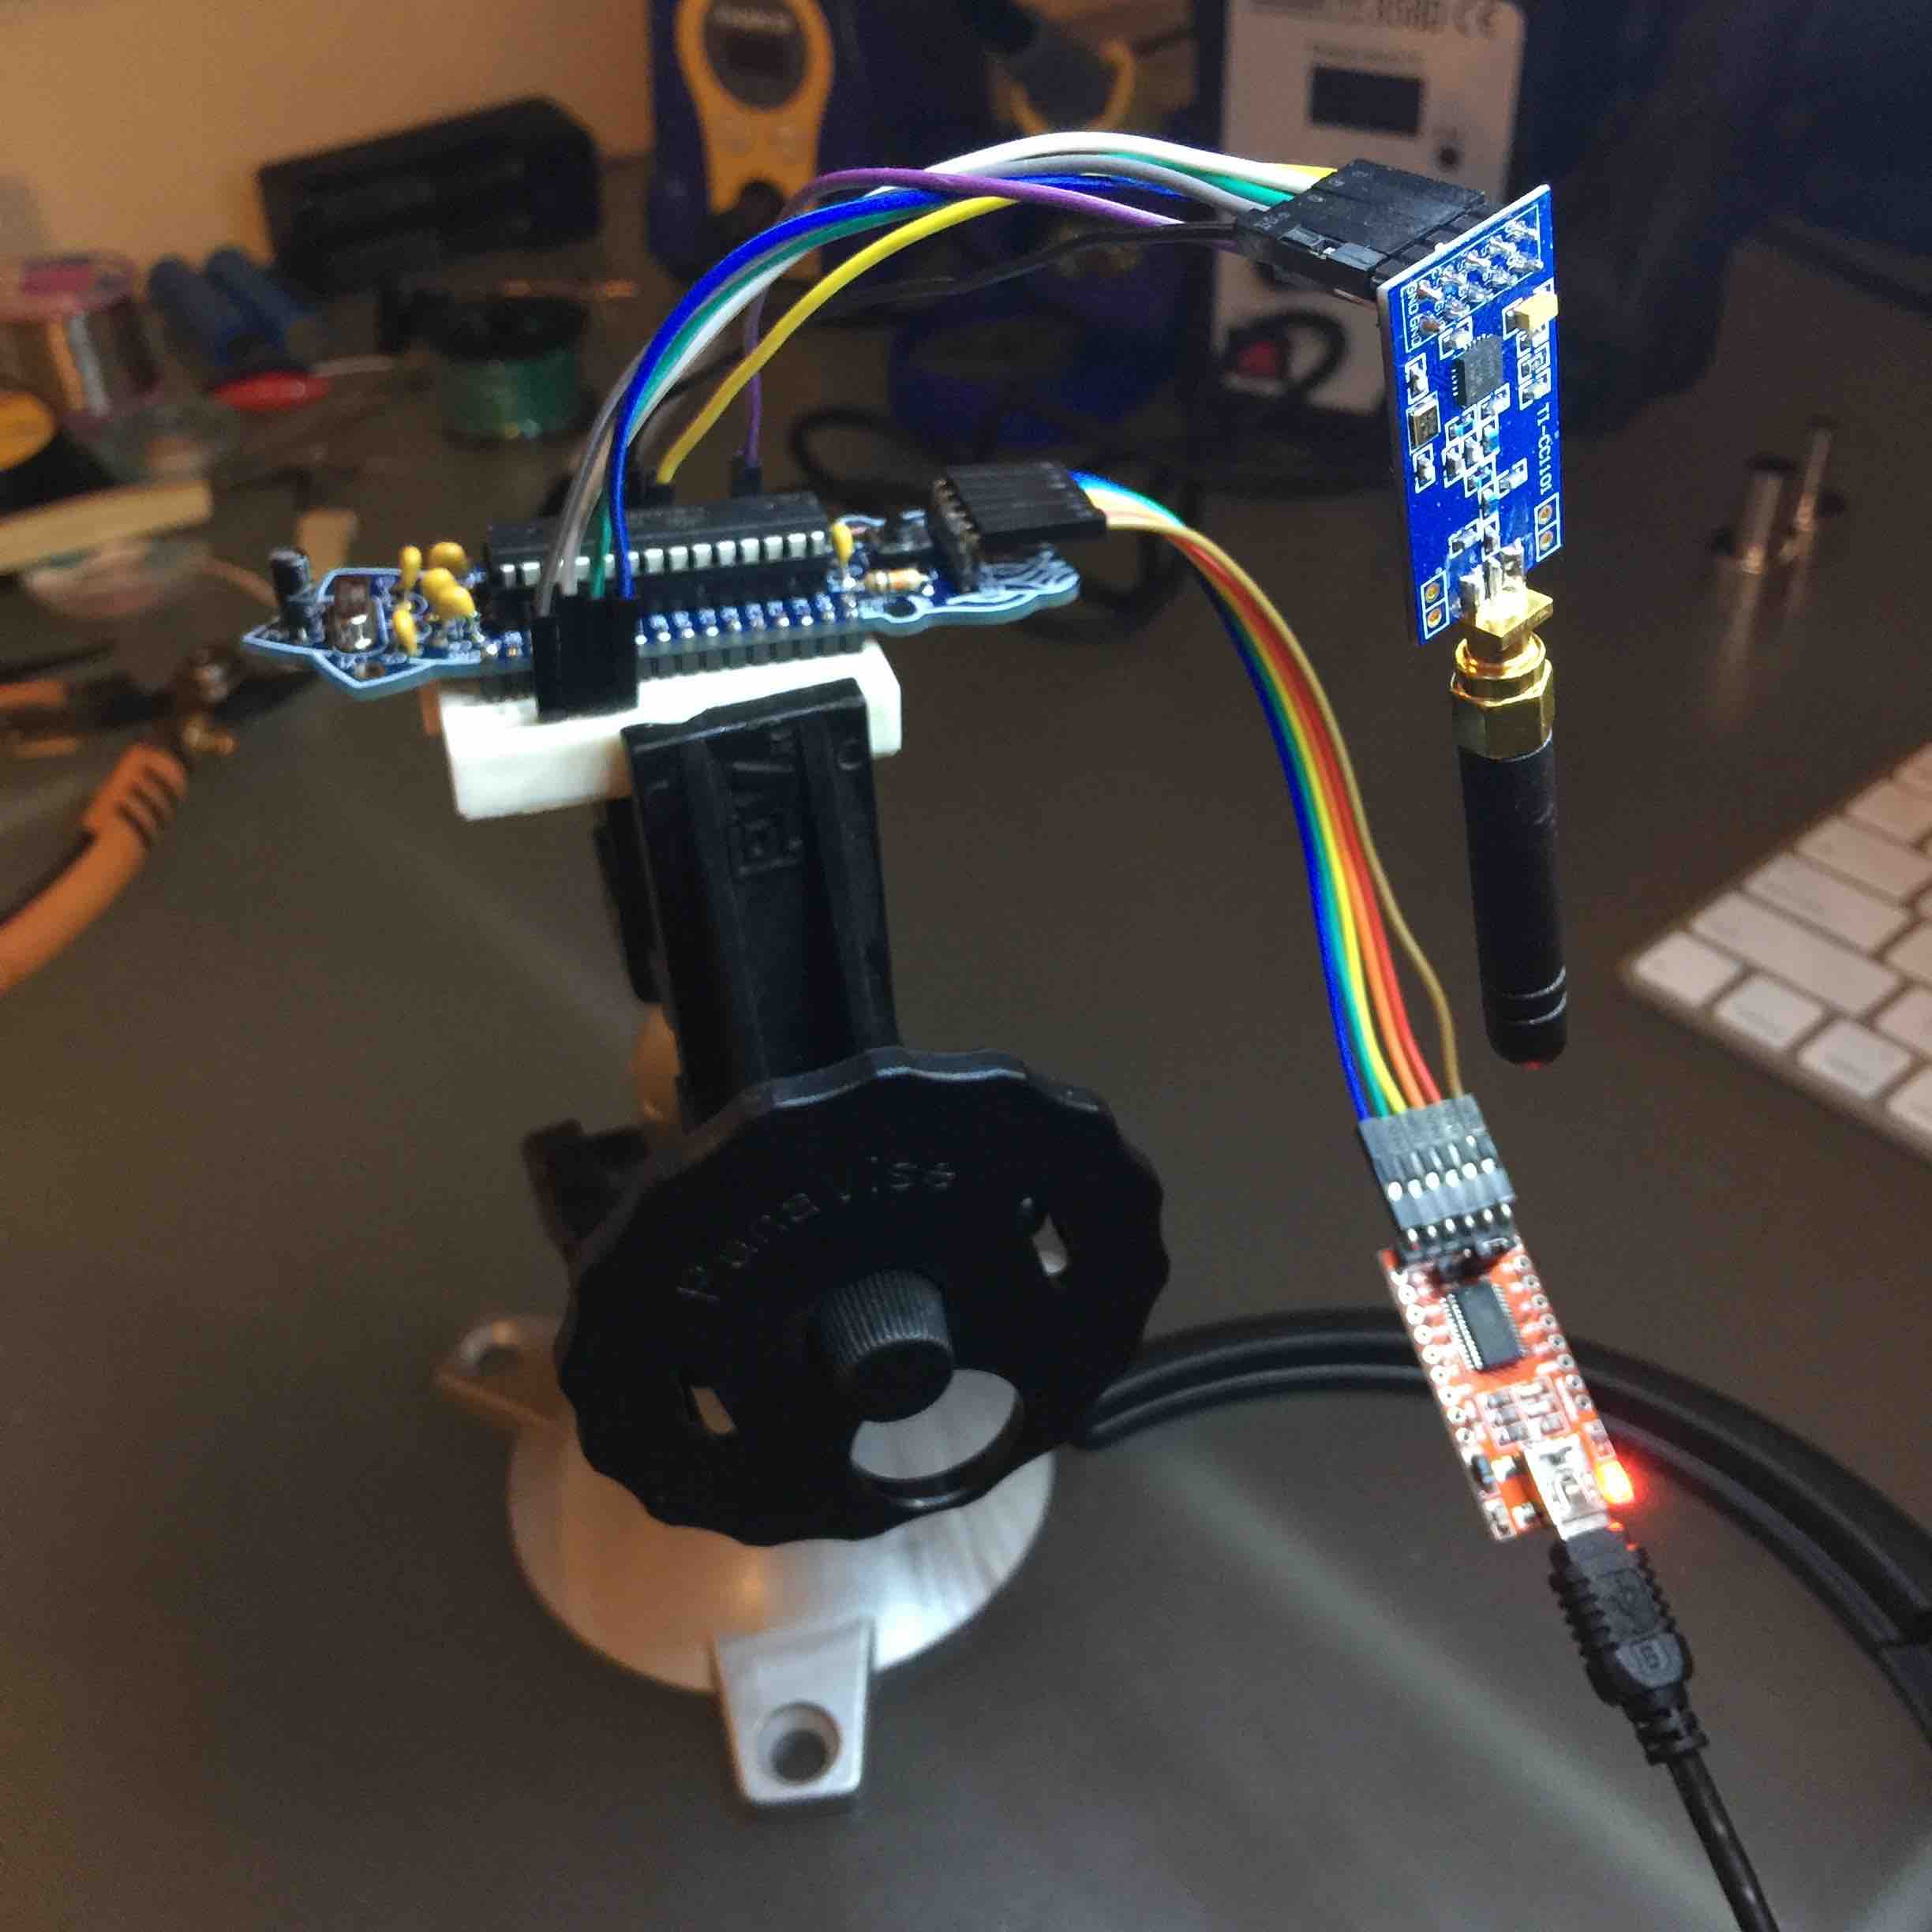 rf1101 with atmega328 from boldport and FTDI serial adapter